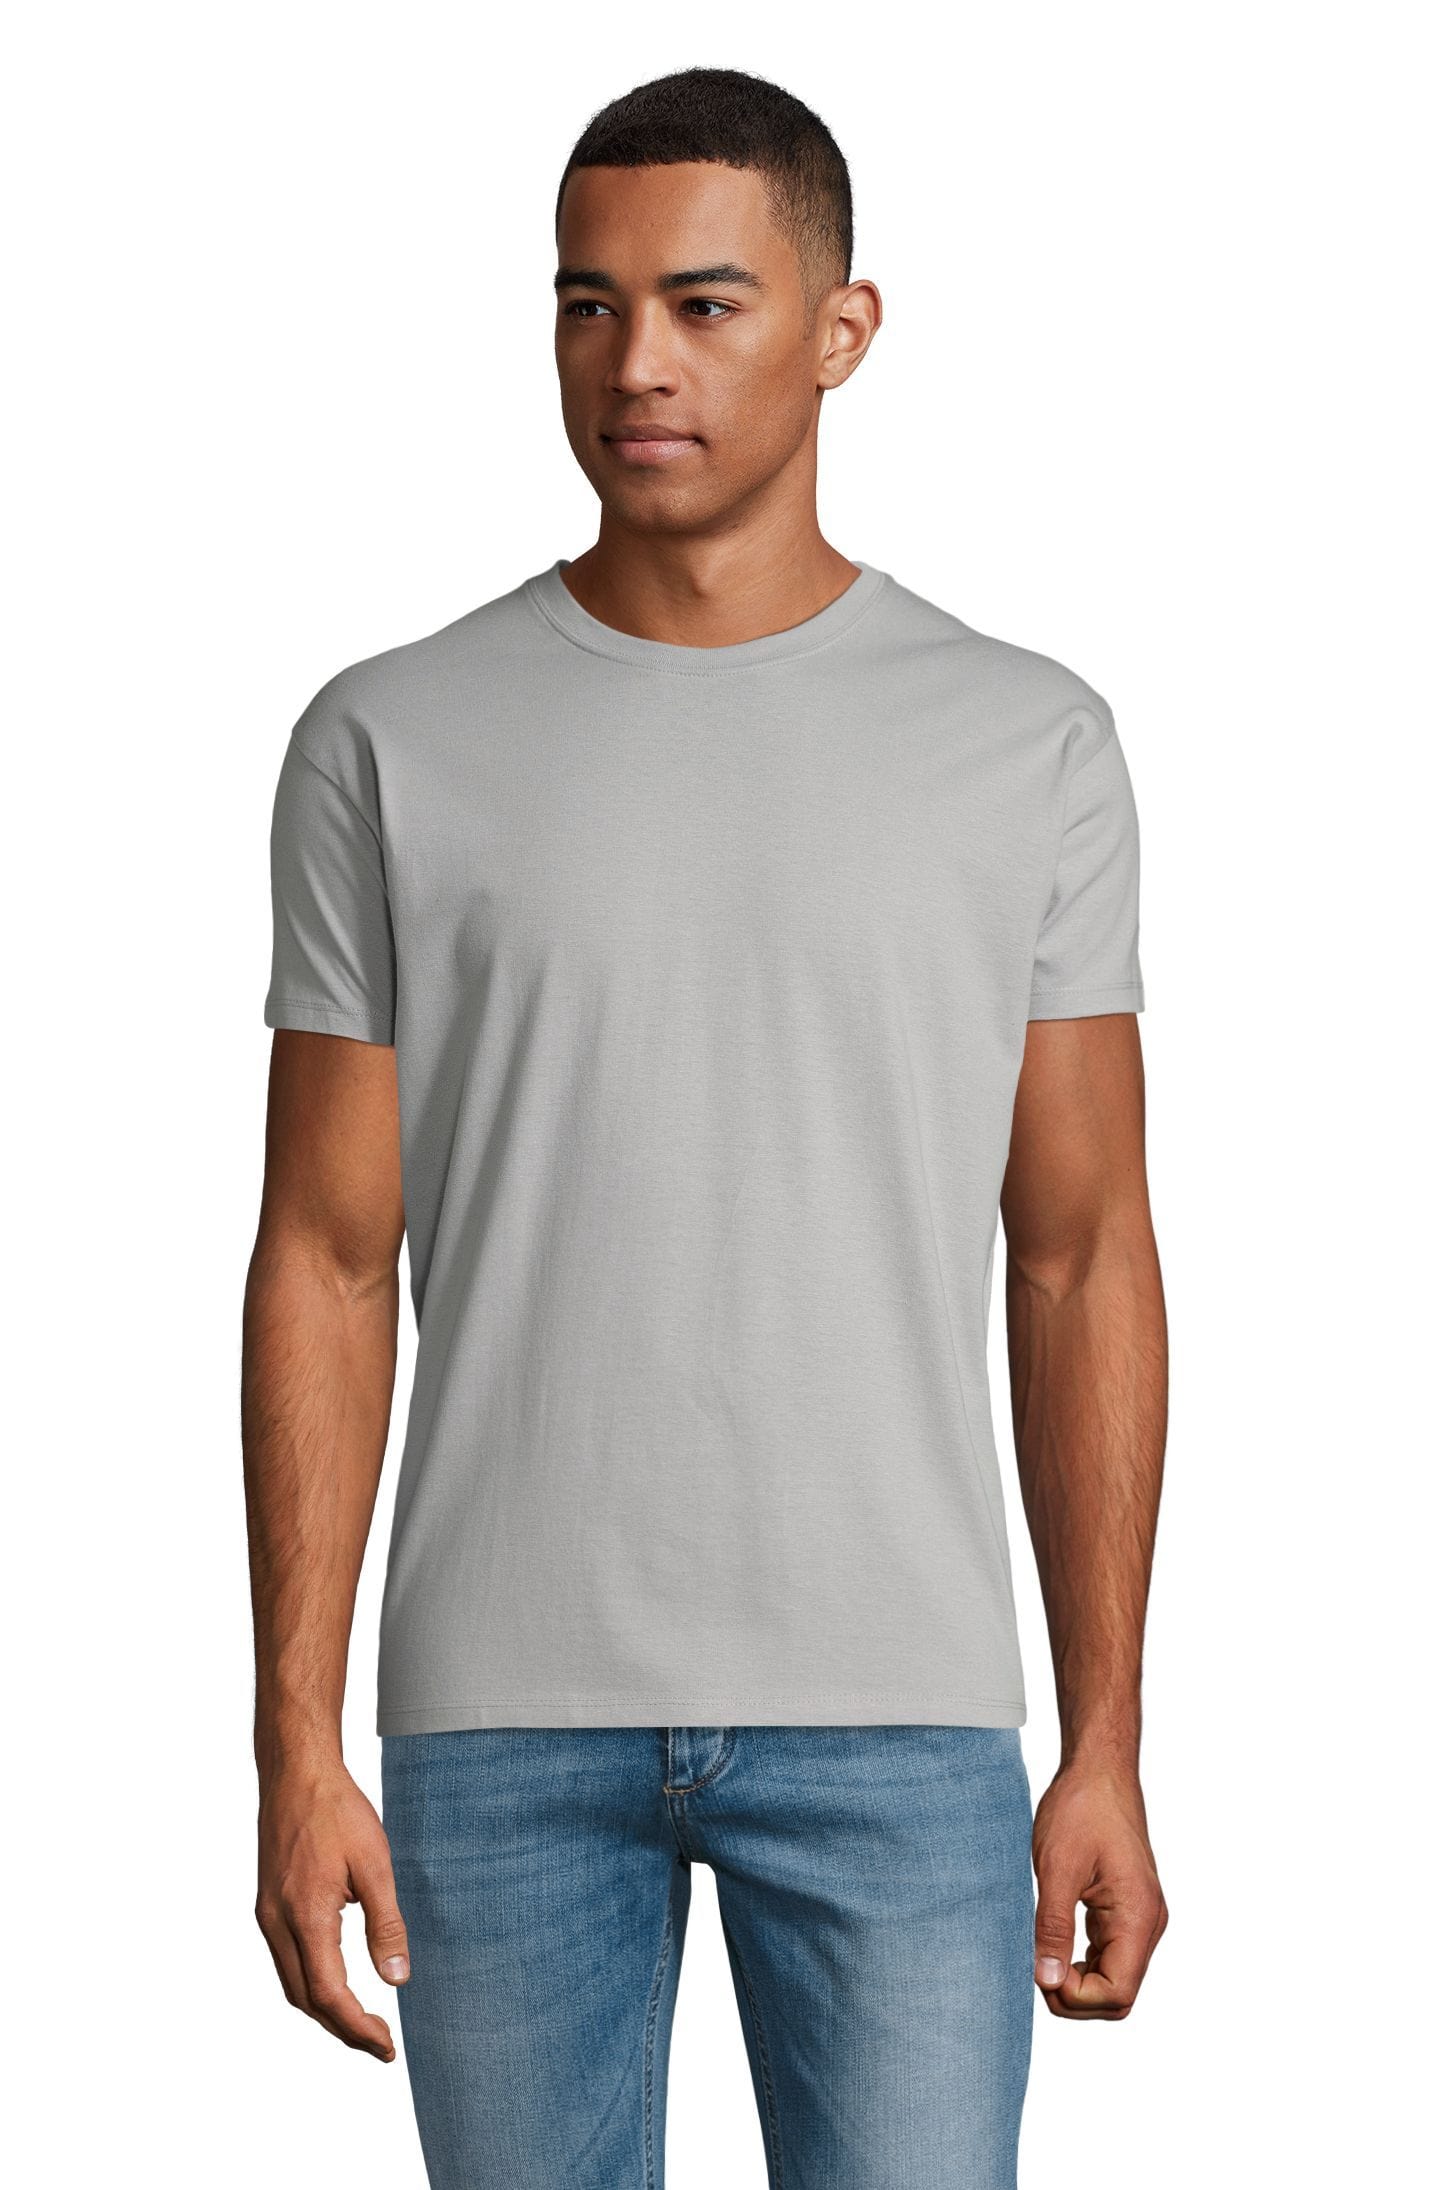 Advanced Order Custom Men&#x27;s Crew Neck T-shirt Your multicolor design on the t-shirt color of your choice (42 colors)